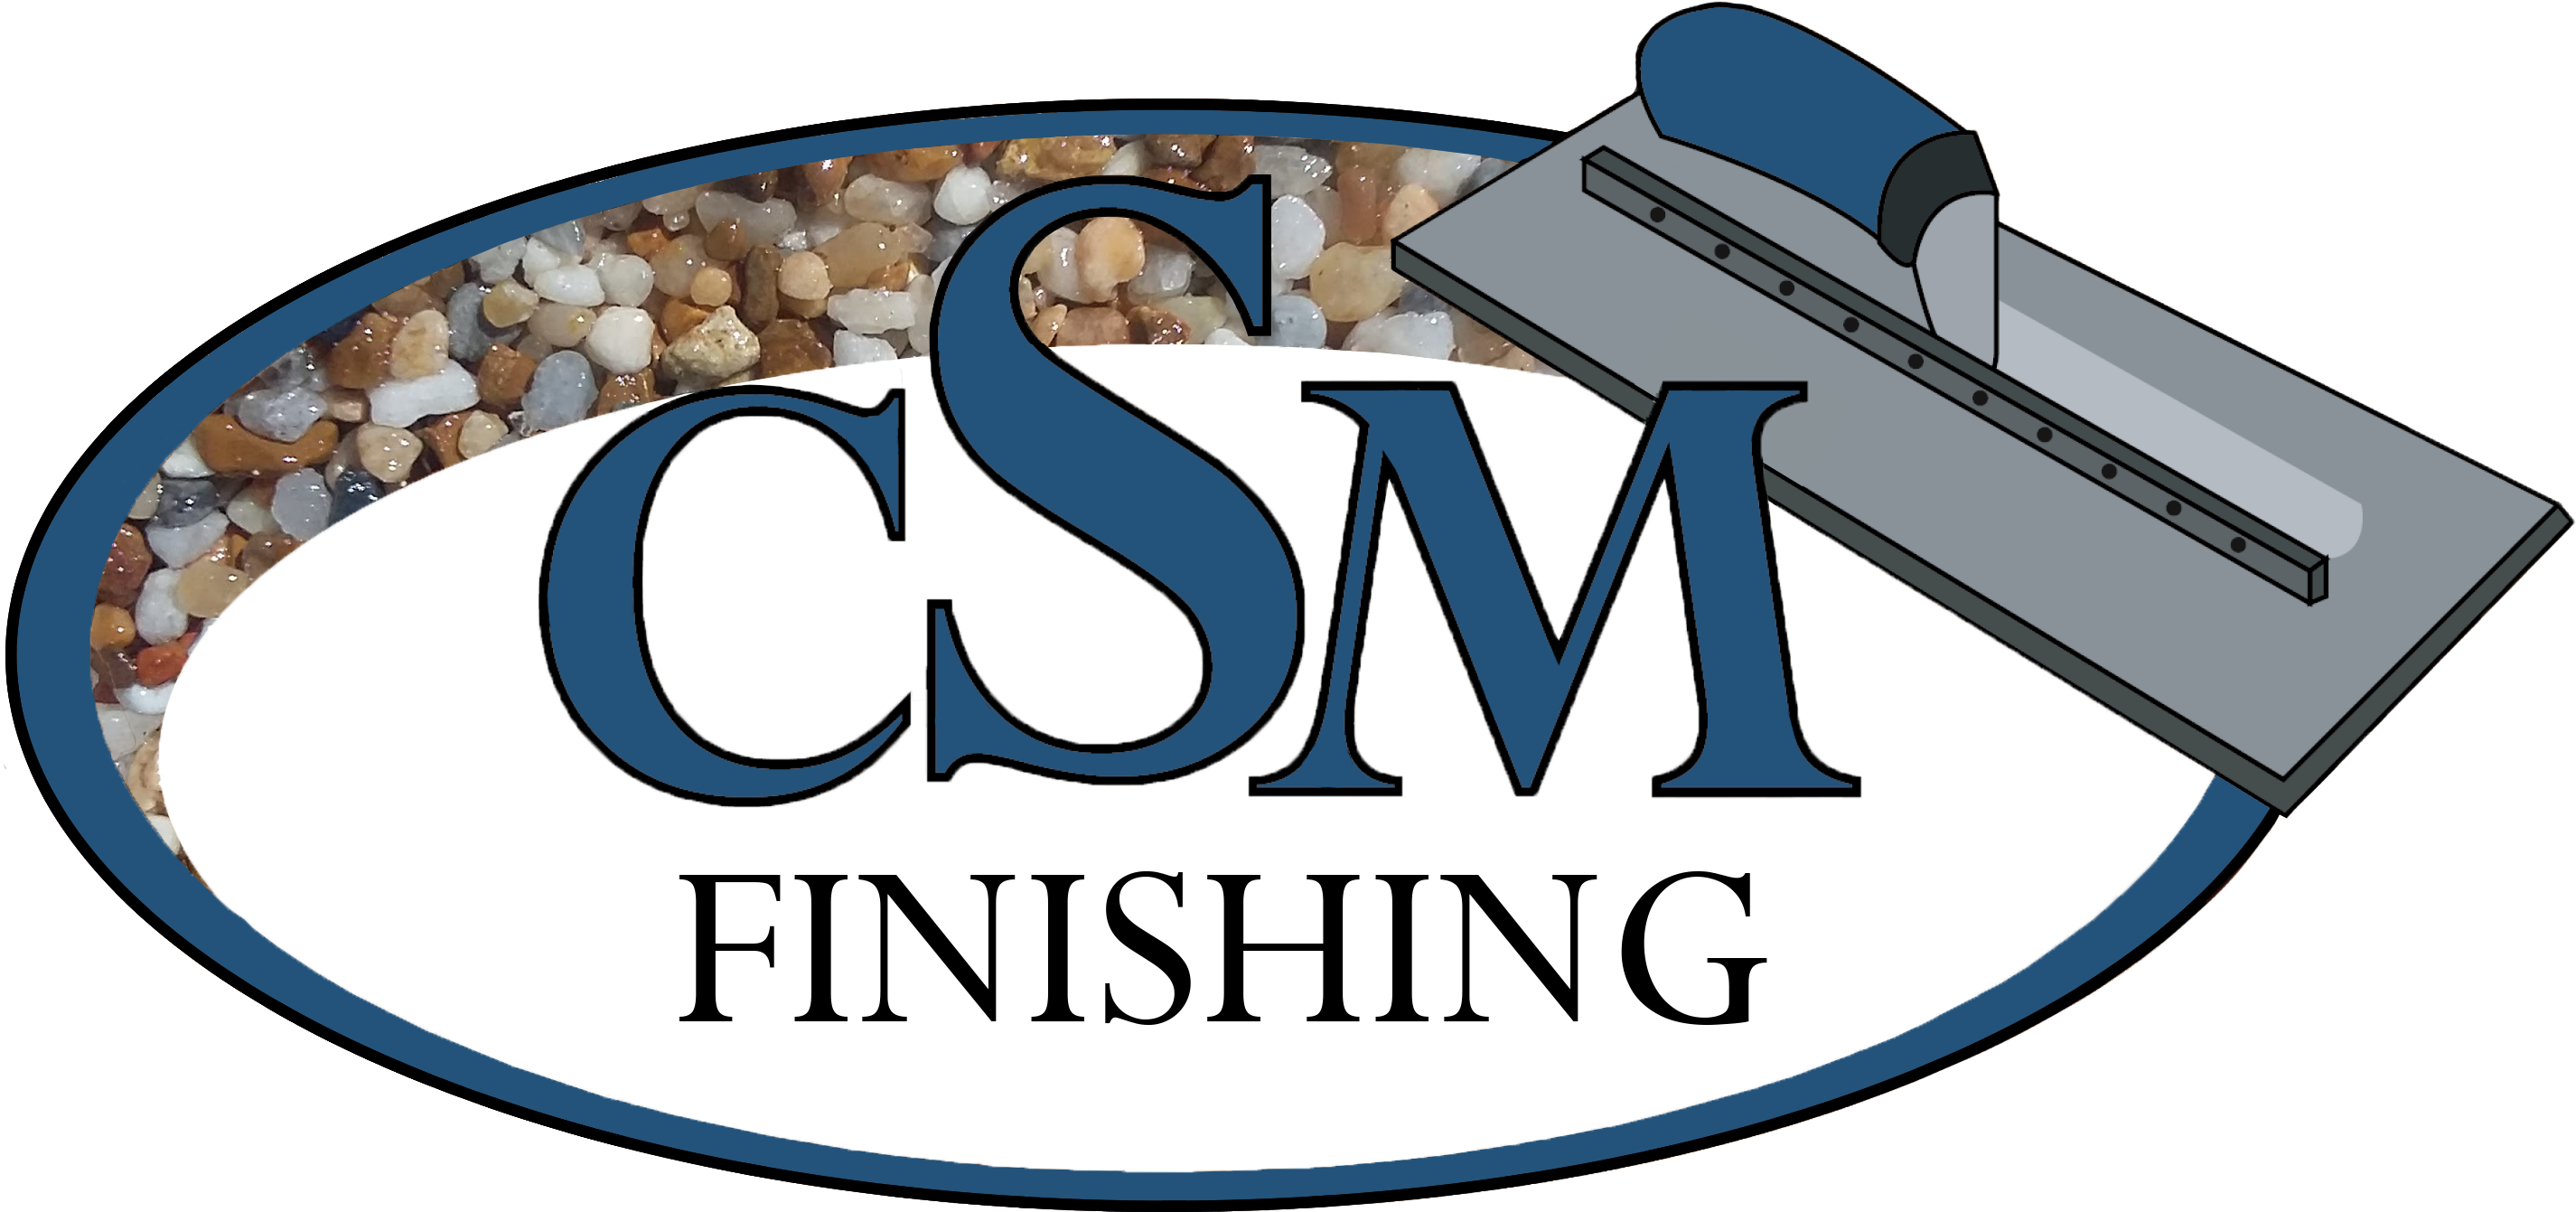 East Syracuse, Ny-13057 - Csm Finishing Clipart (2962x1575), Png Download